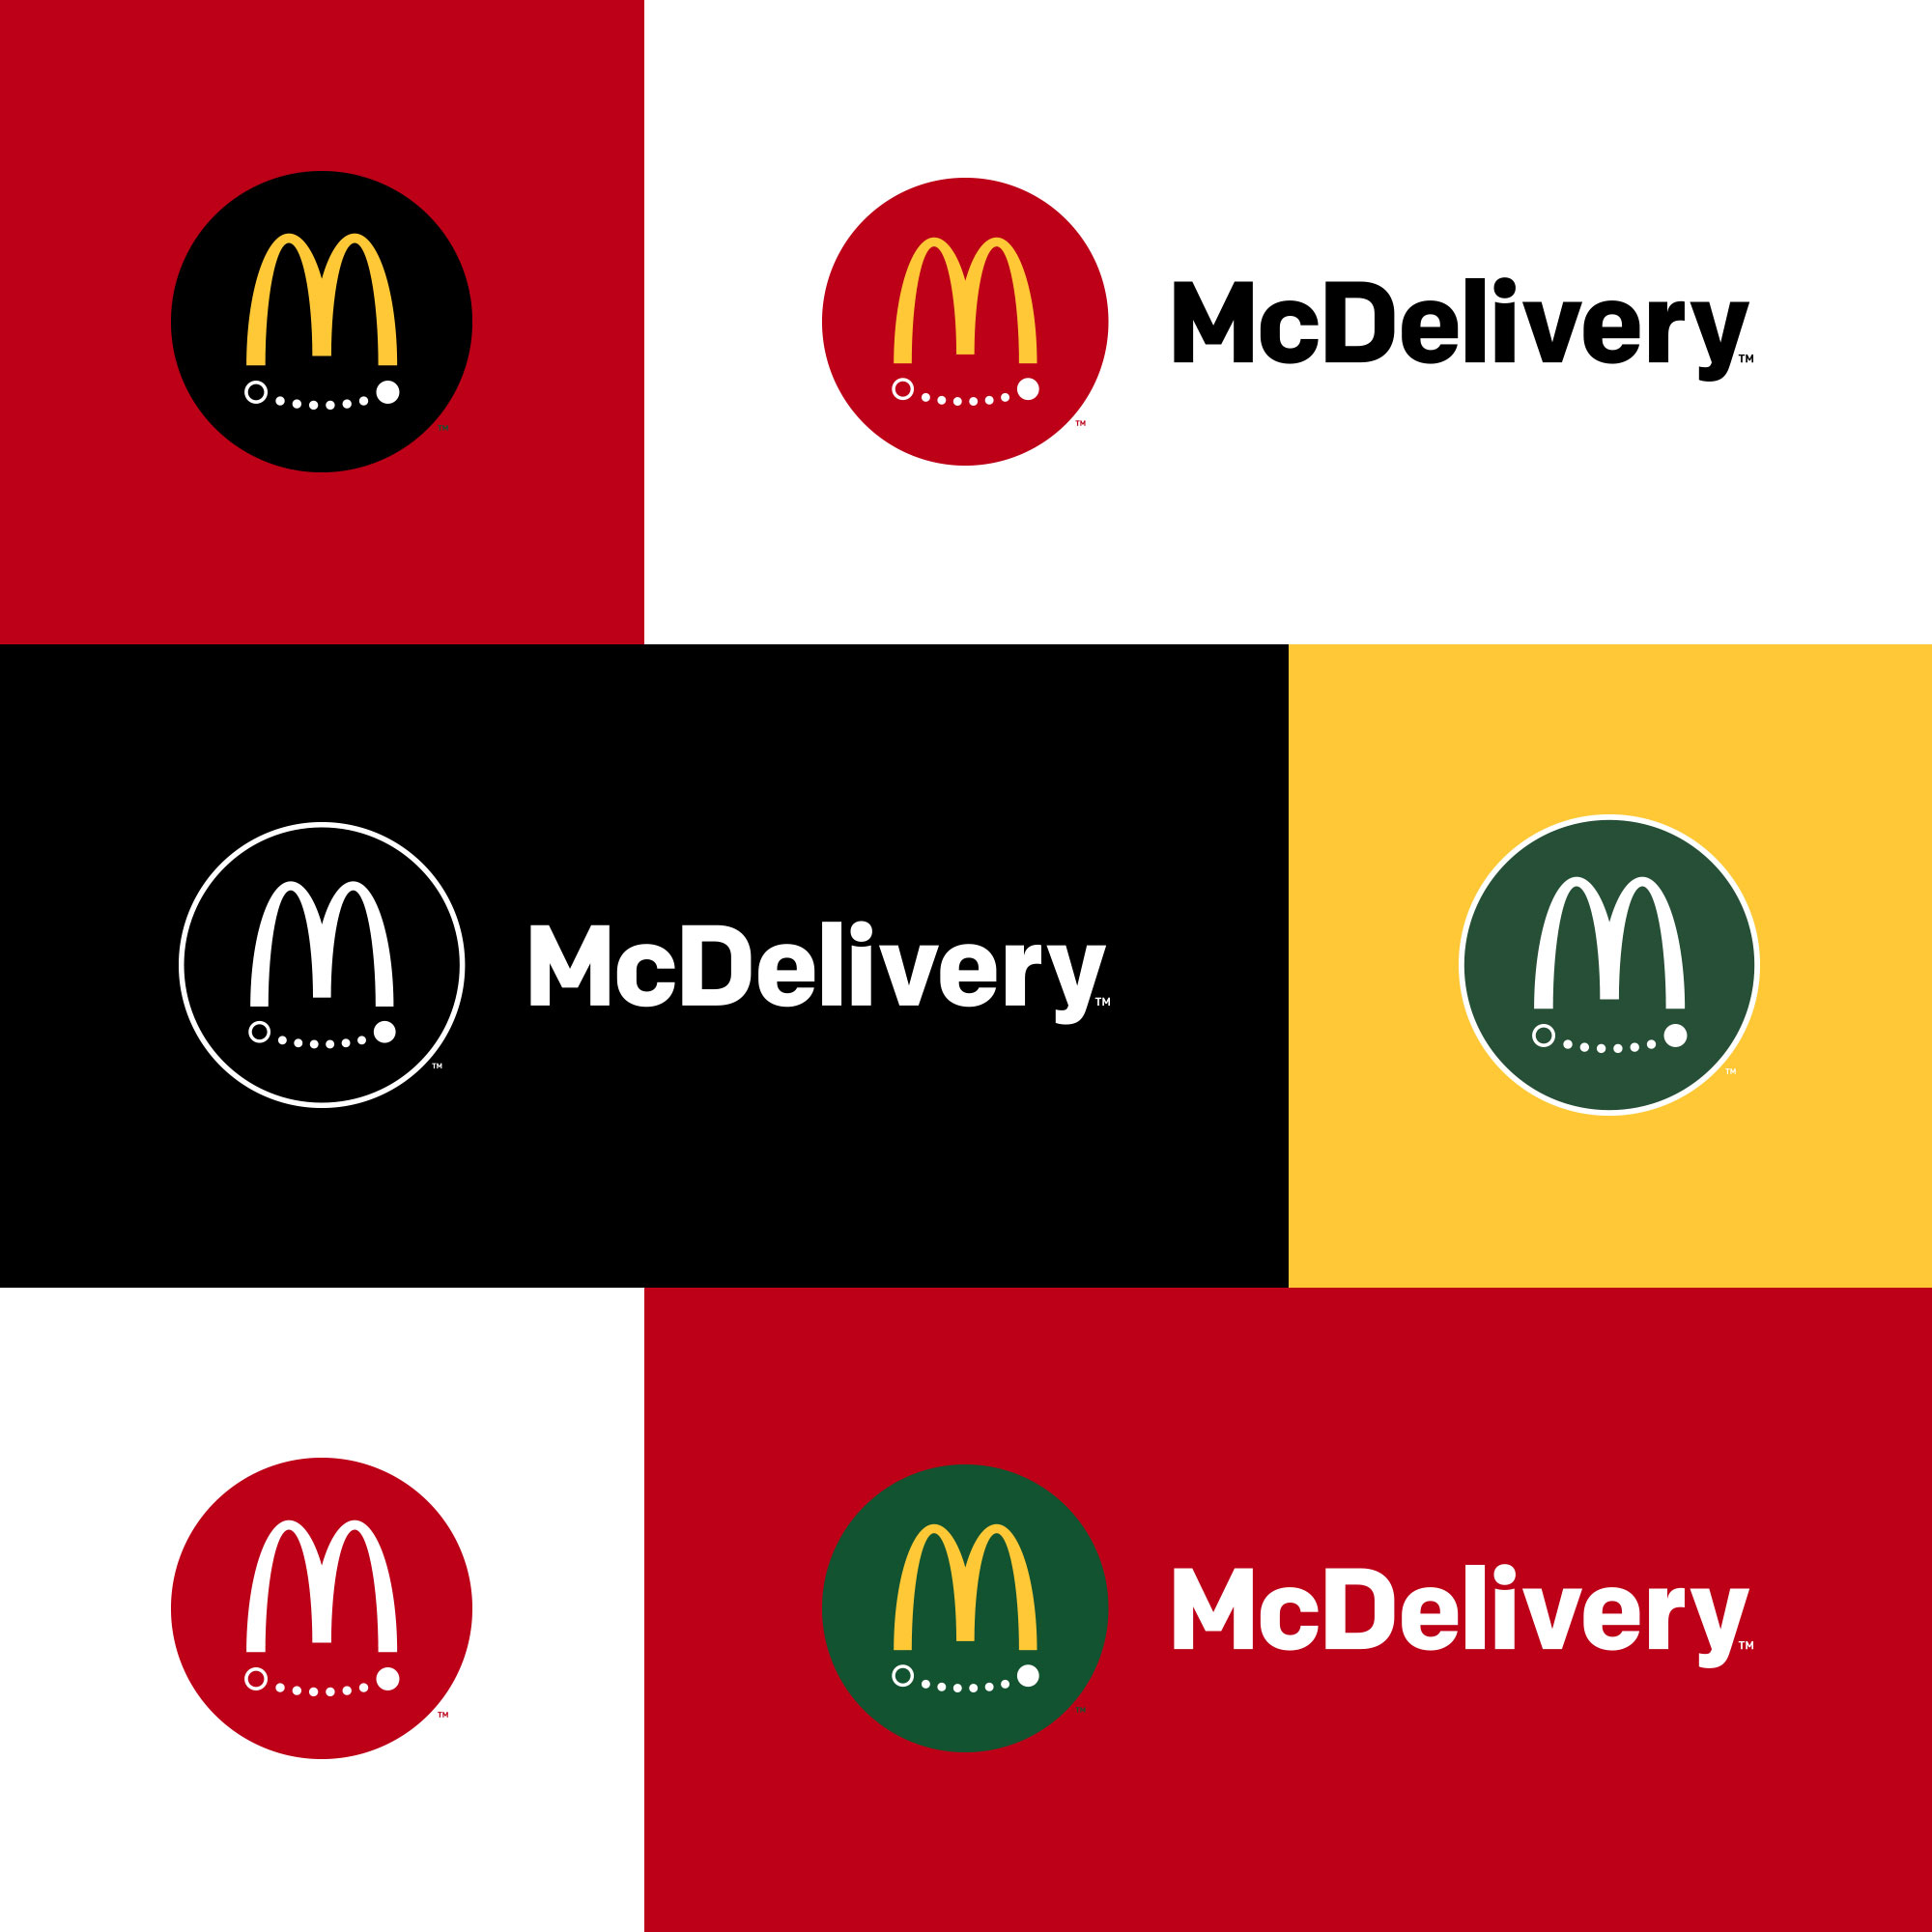 Mcdelivery